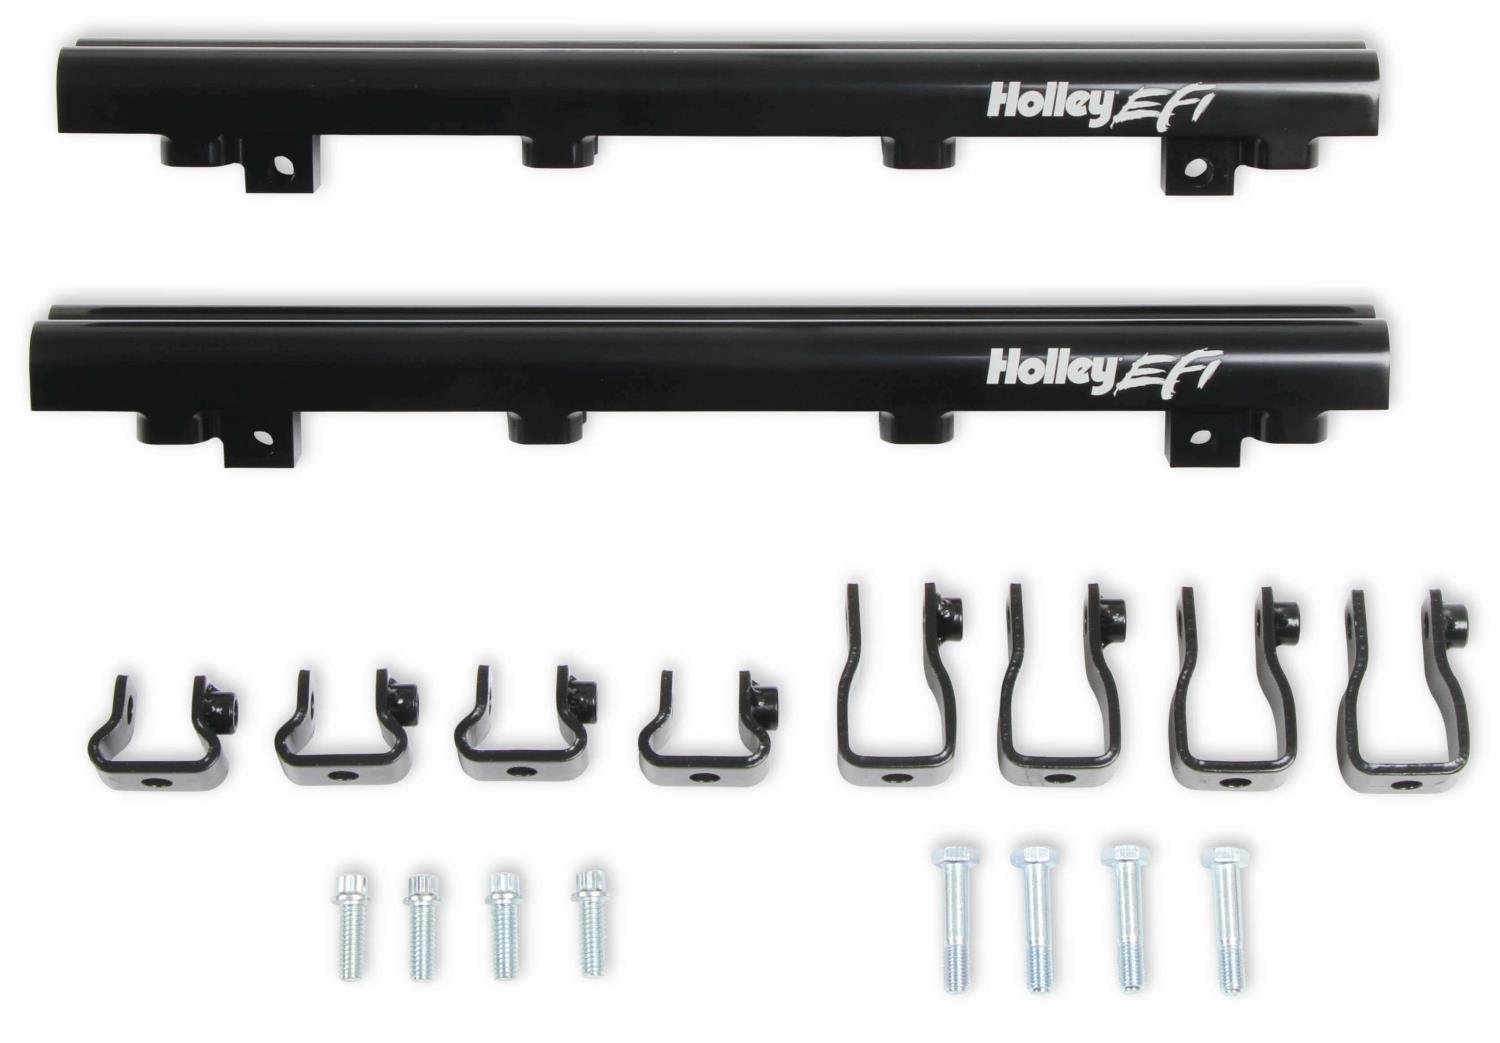 Replacement Fuel Rail Kit for Holley's Lo-Ram Dual